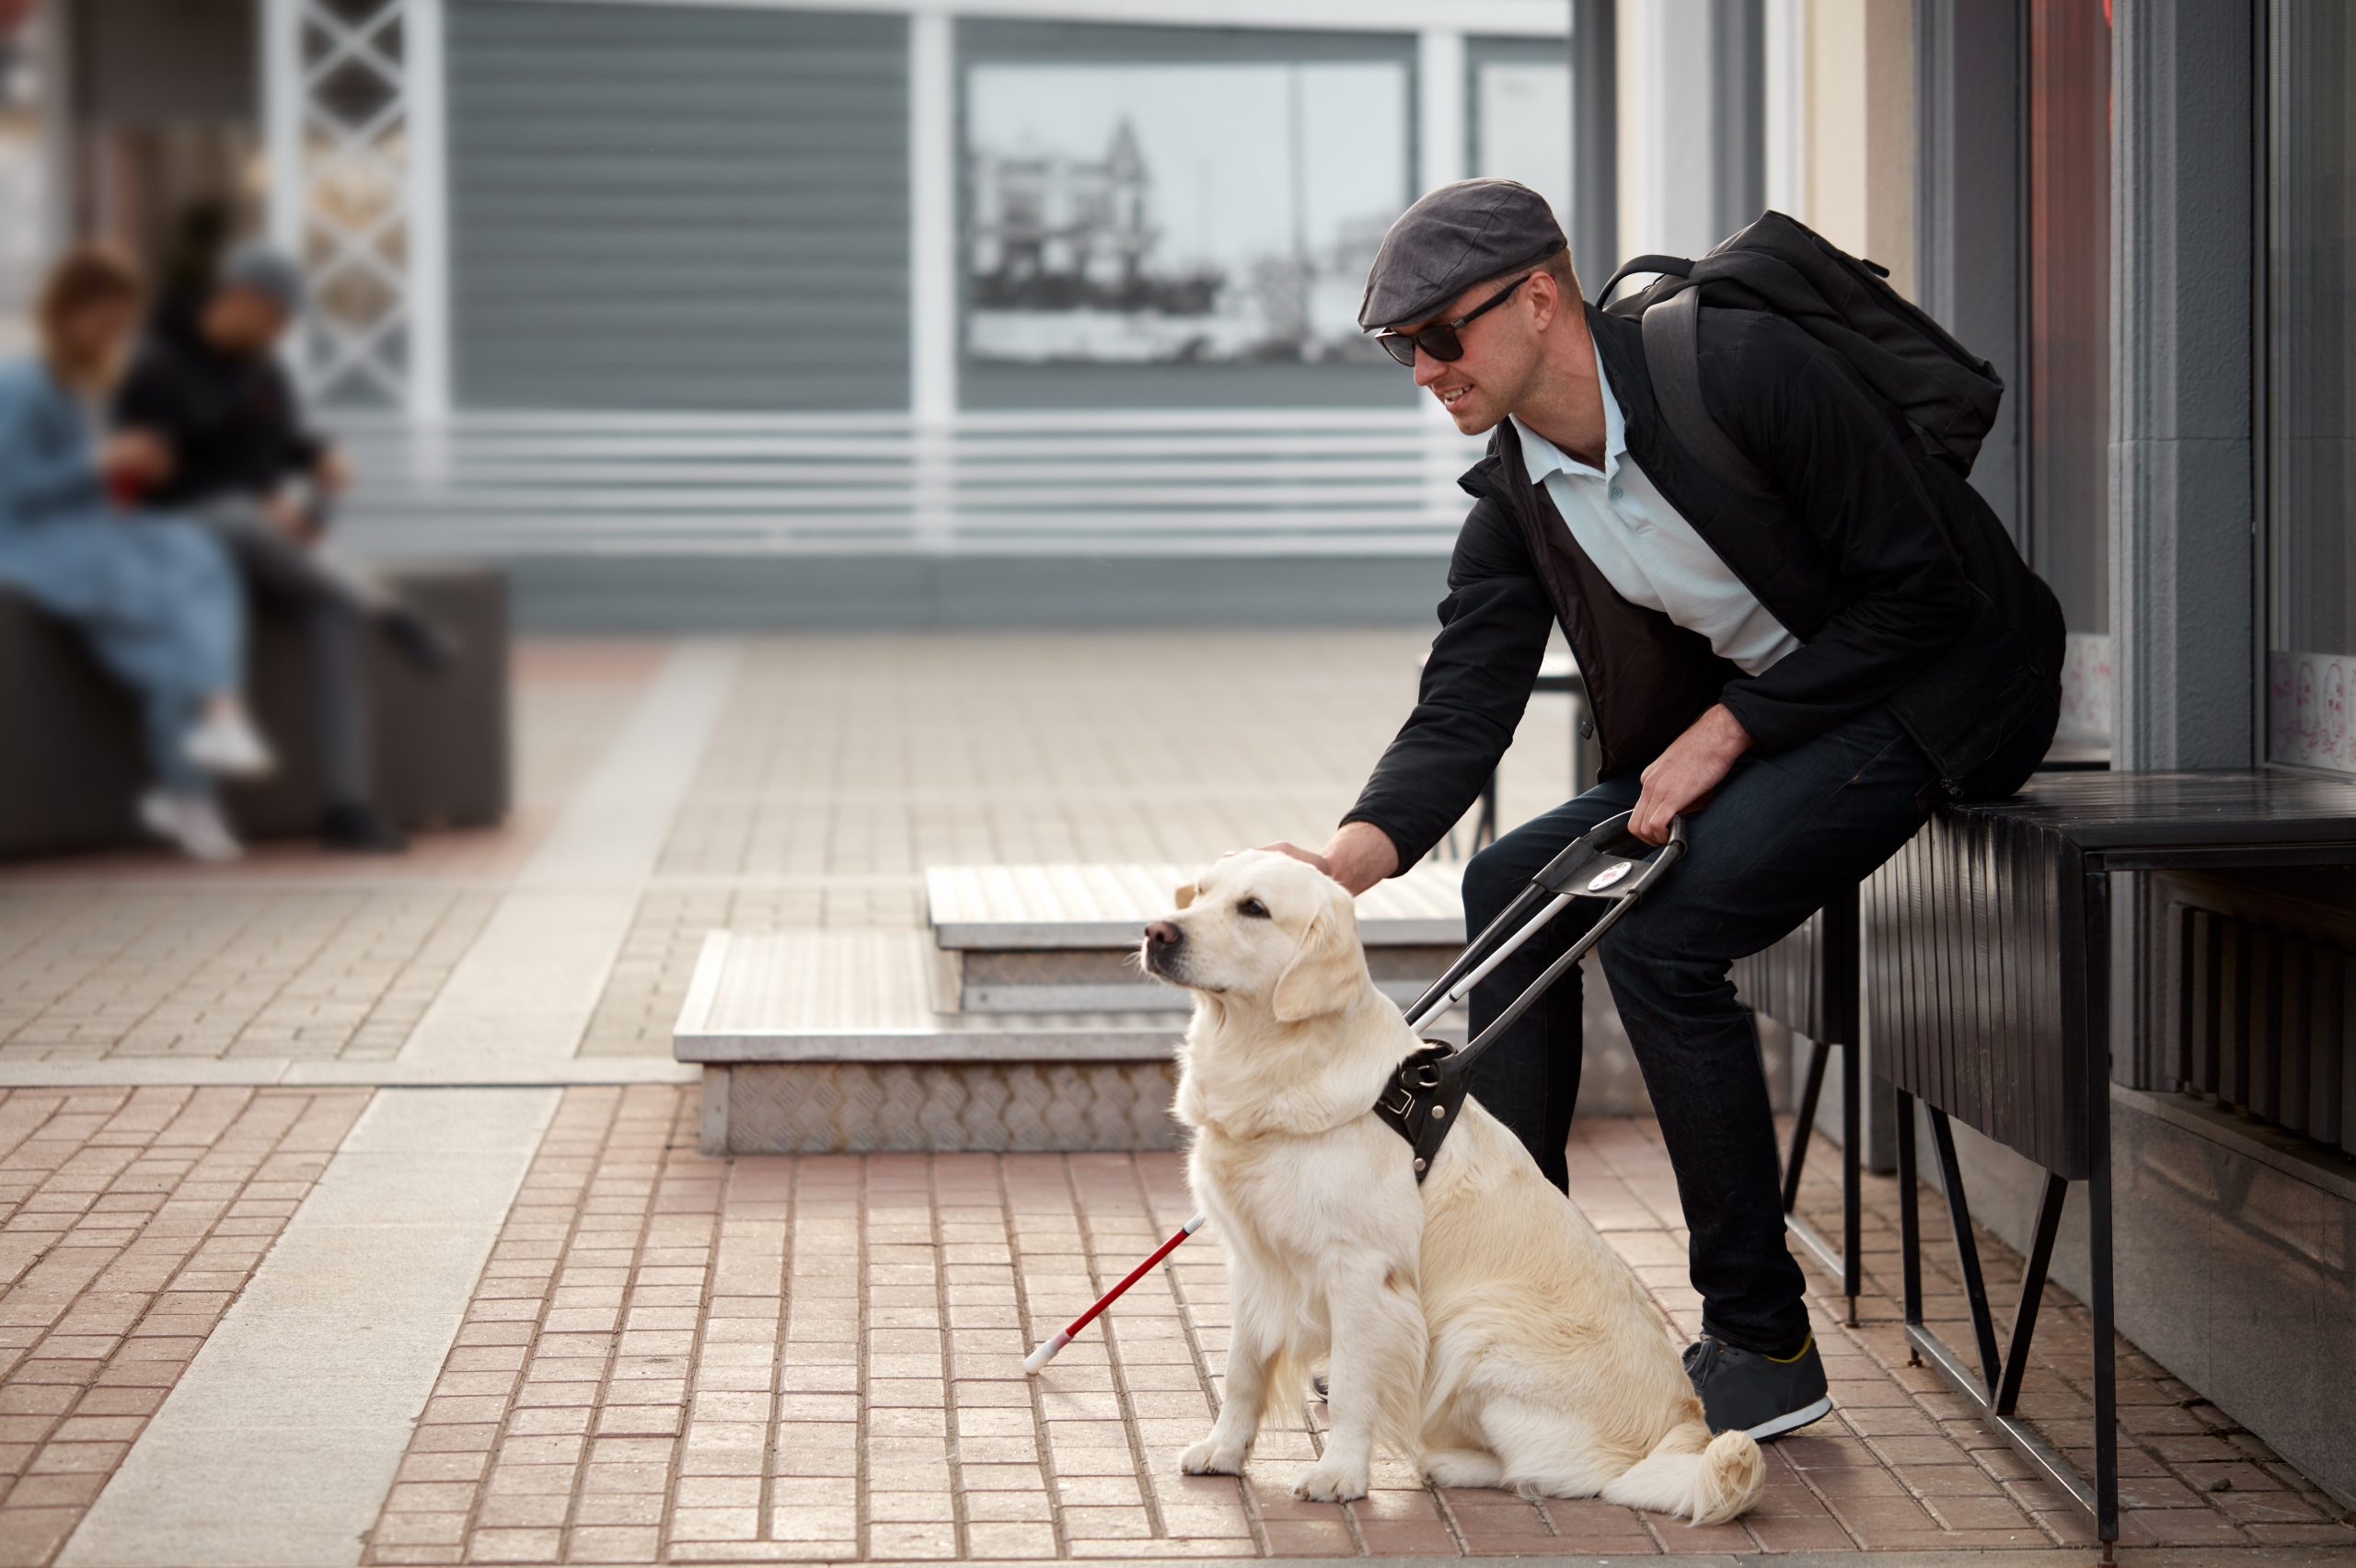 Blind man on patio petting his guide dog and holding a white cane